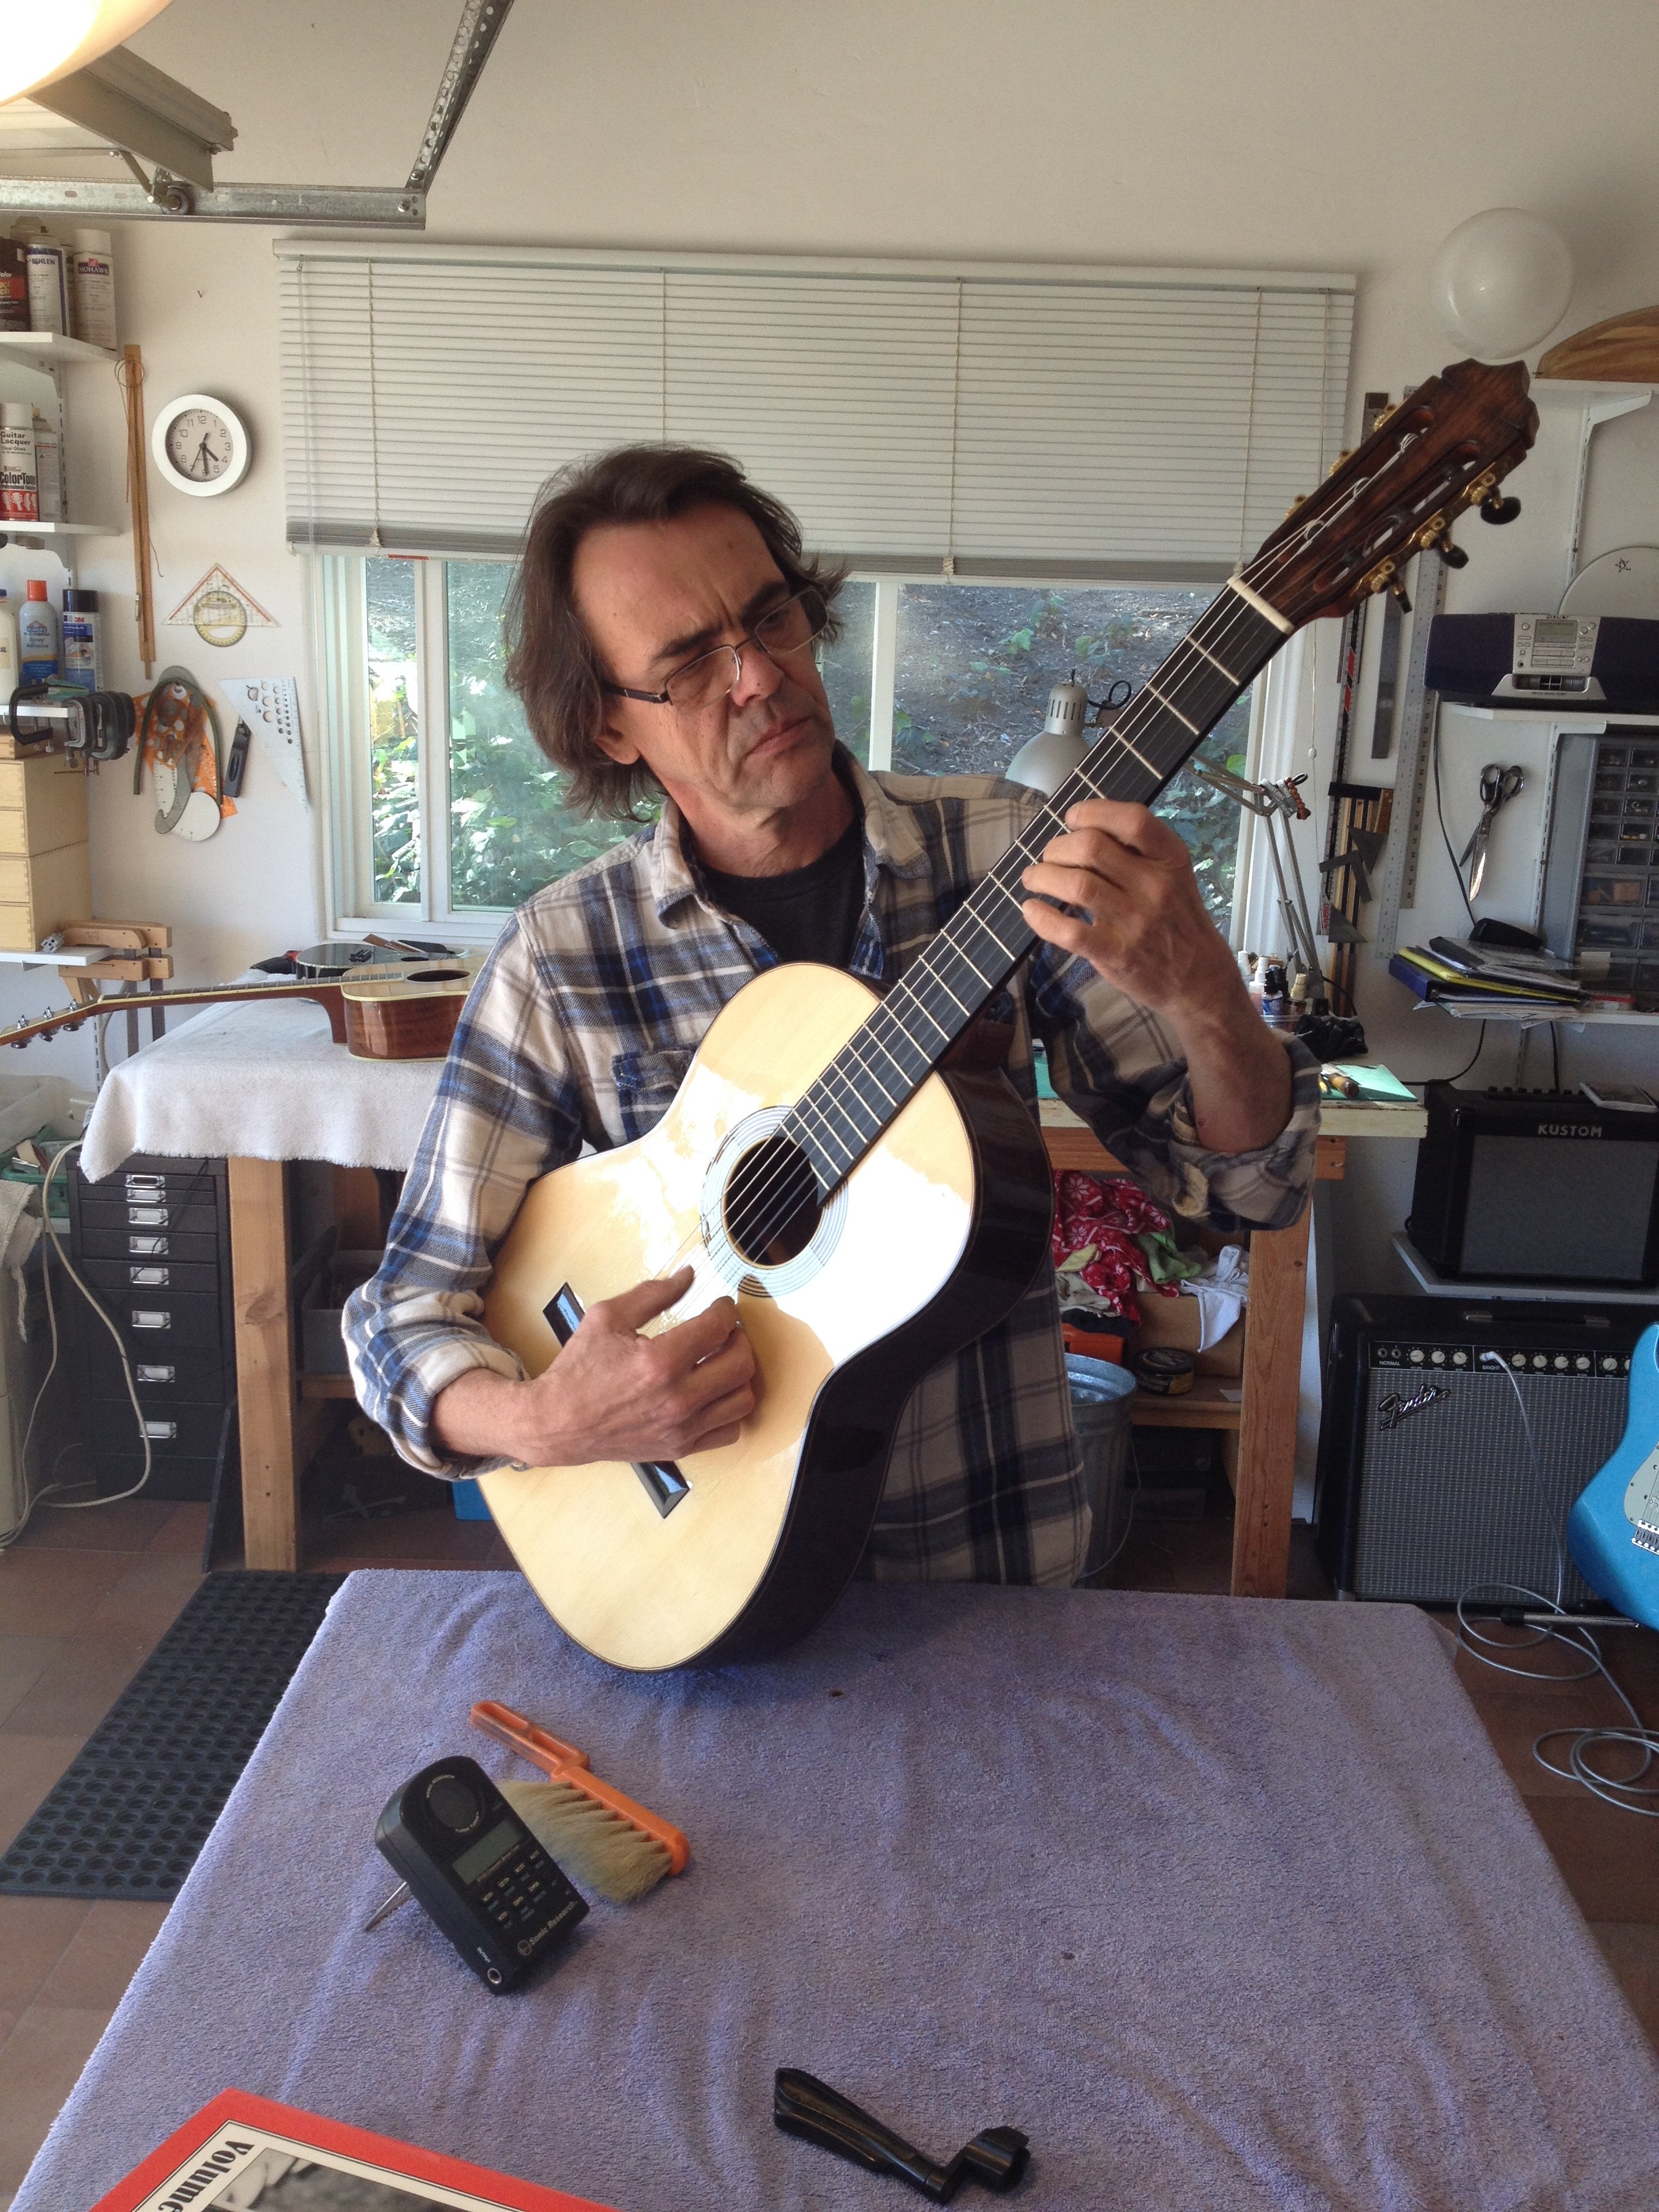 This is what happens when you hang out with a master Luthier for about a year…